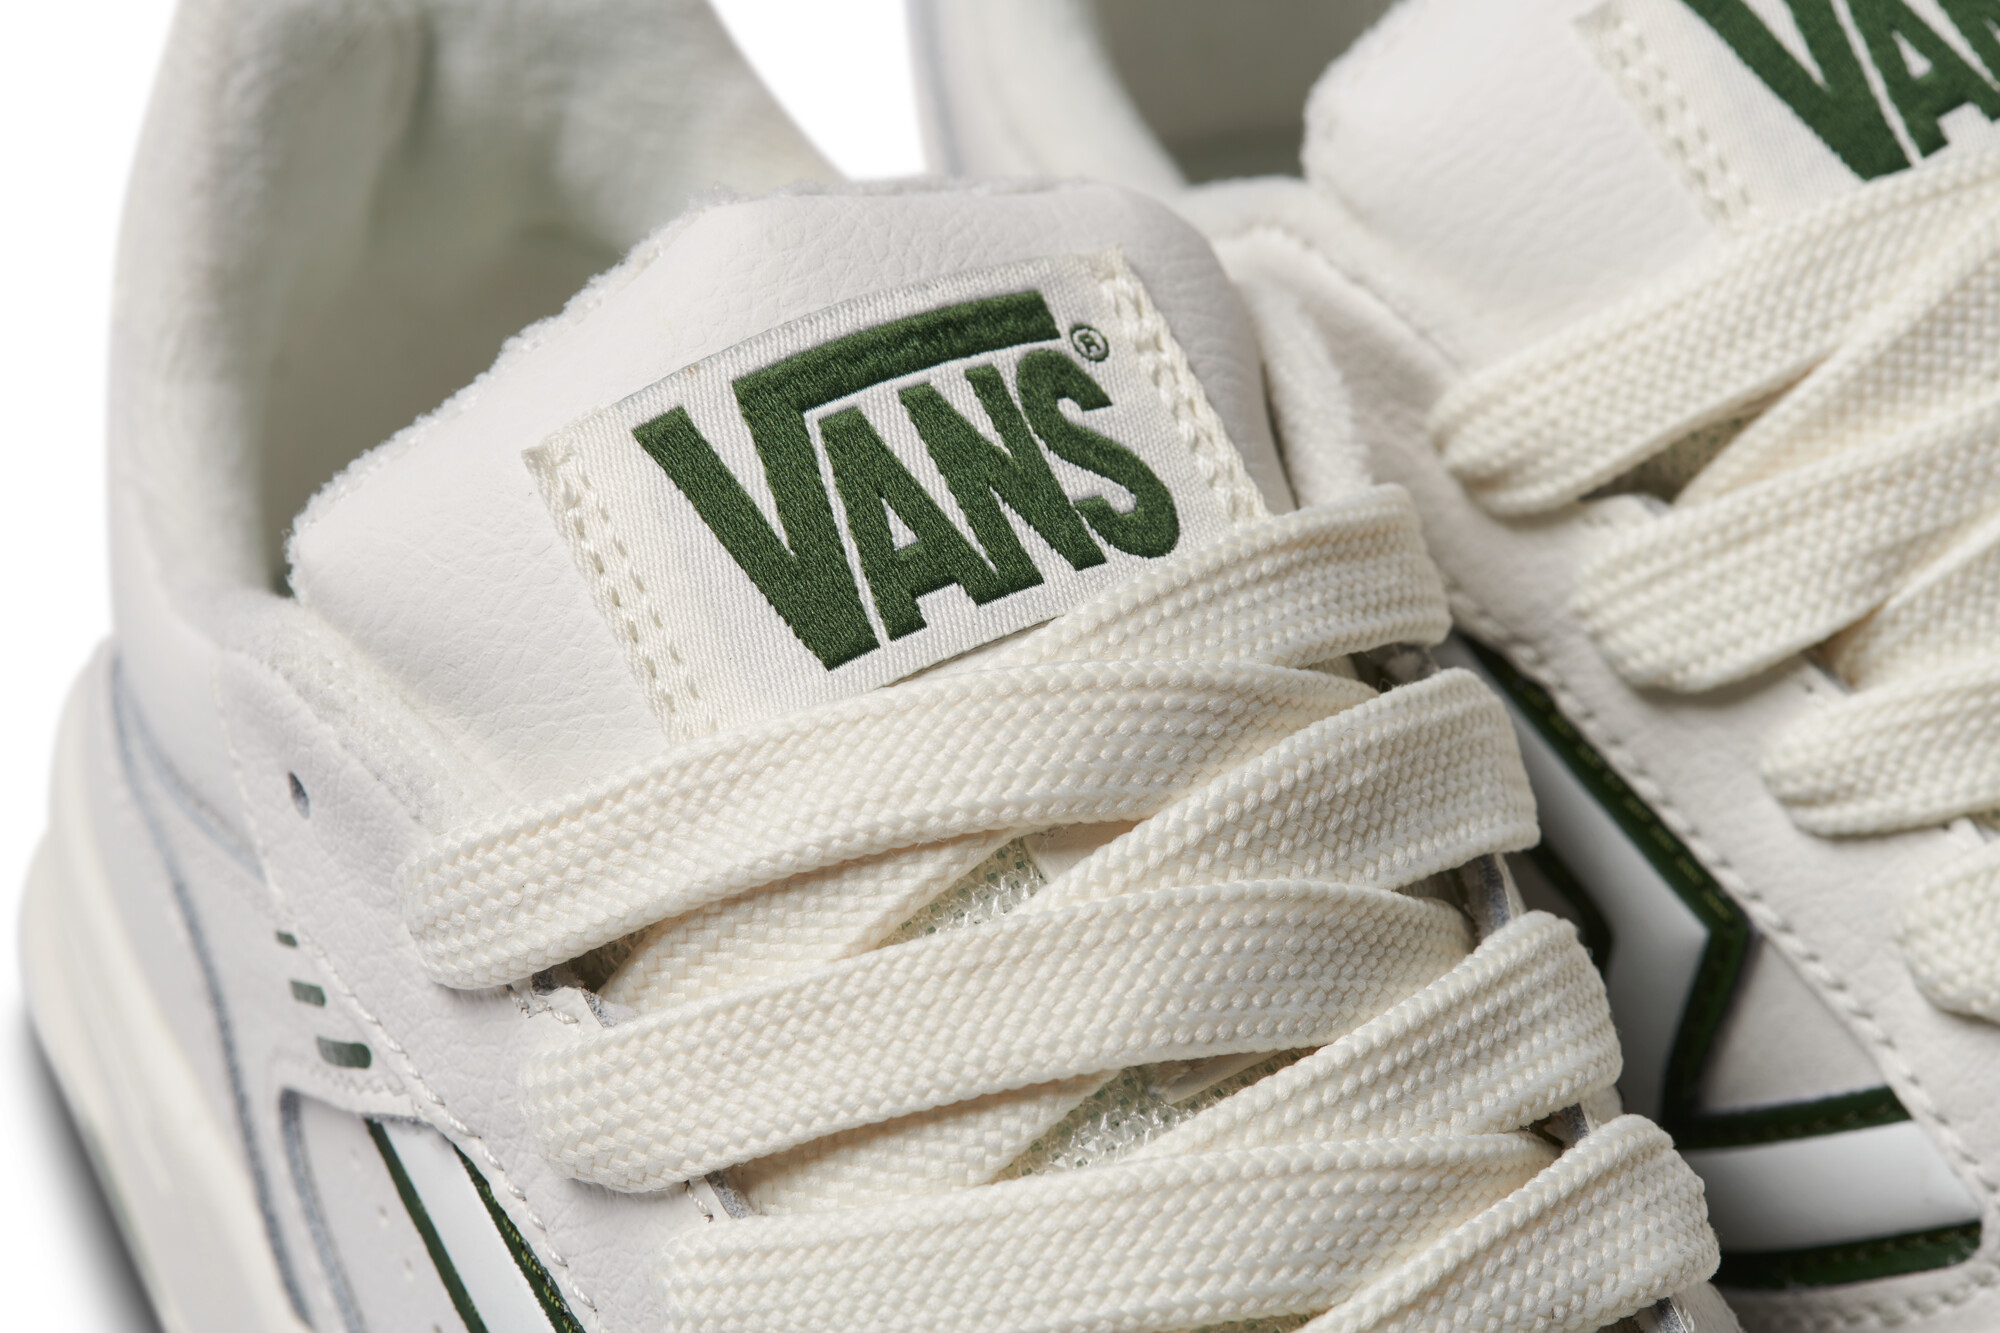 Vans' Mixxa, Upland, Hylane skate shoes in white, black, red, green, yellow colorways